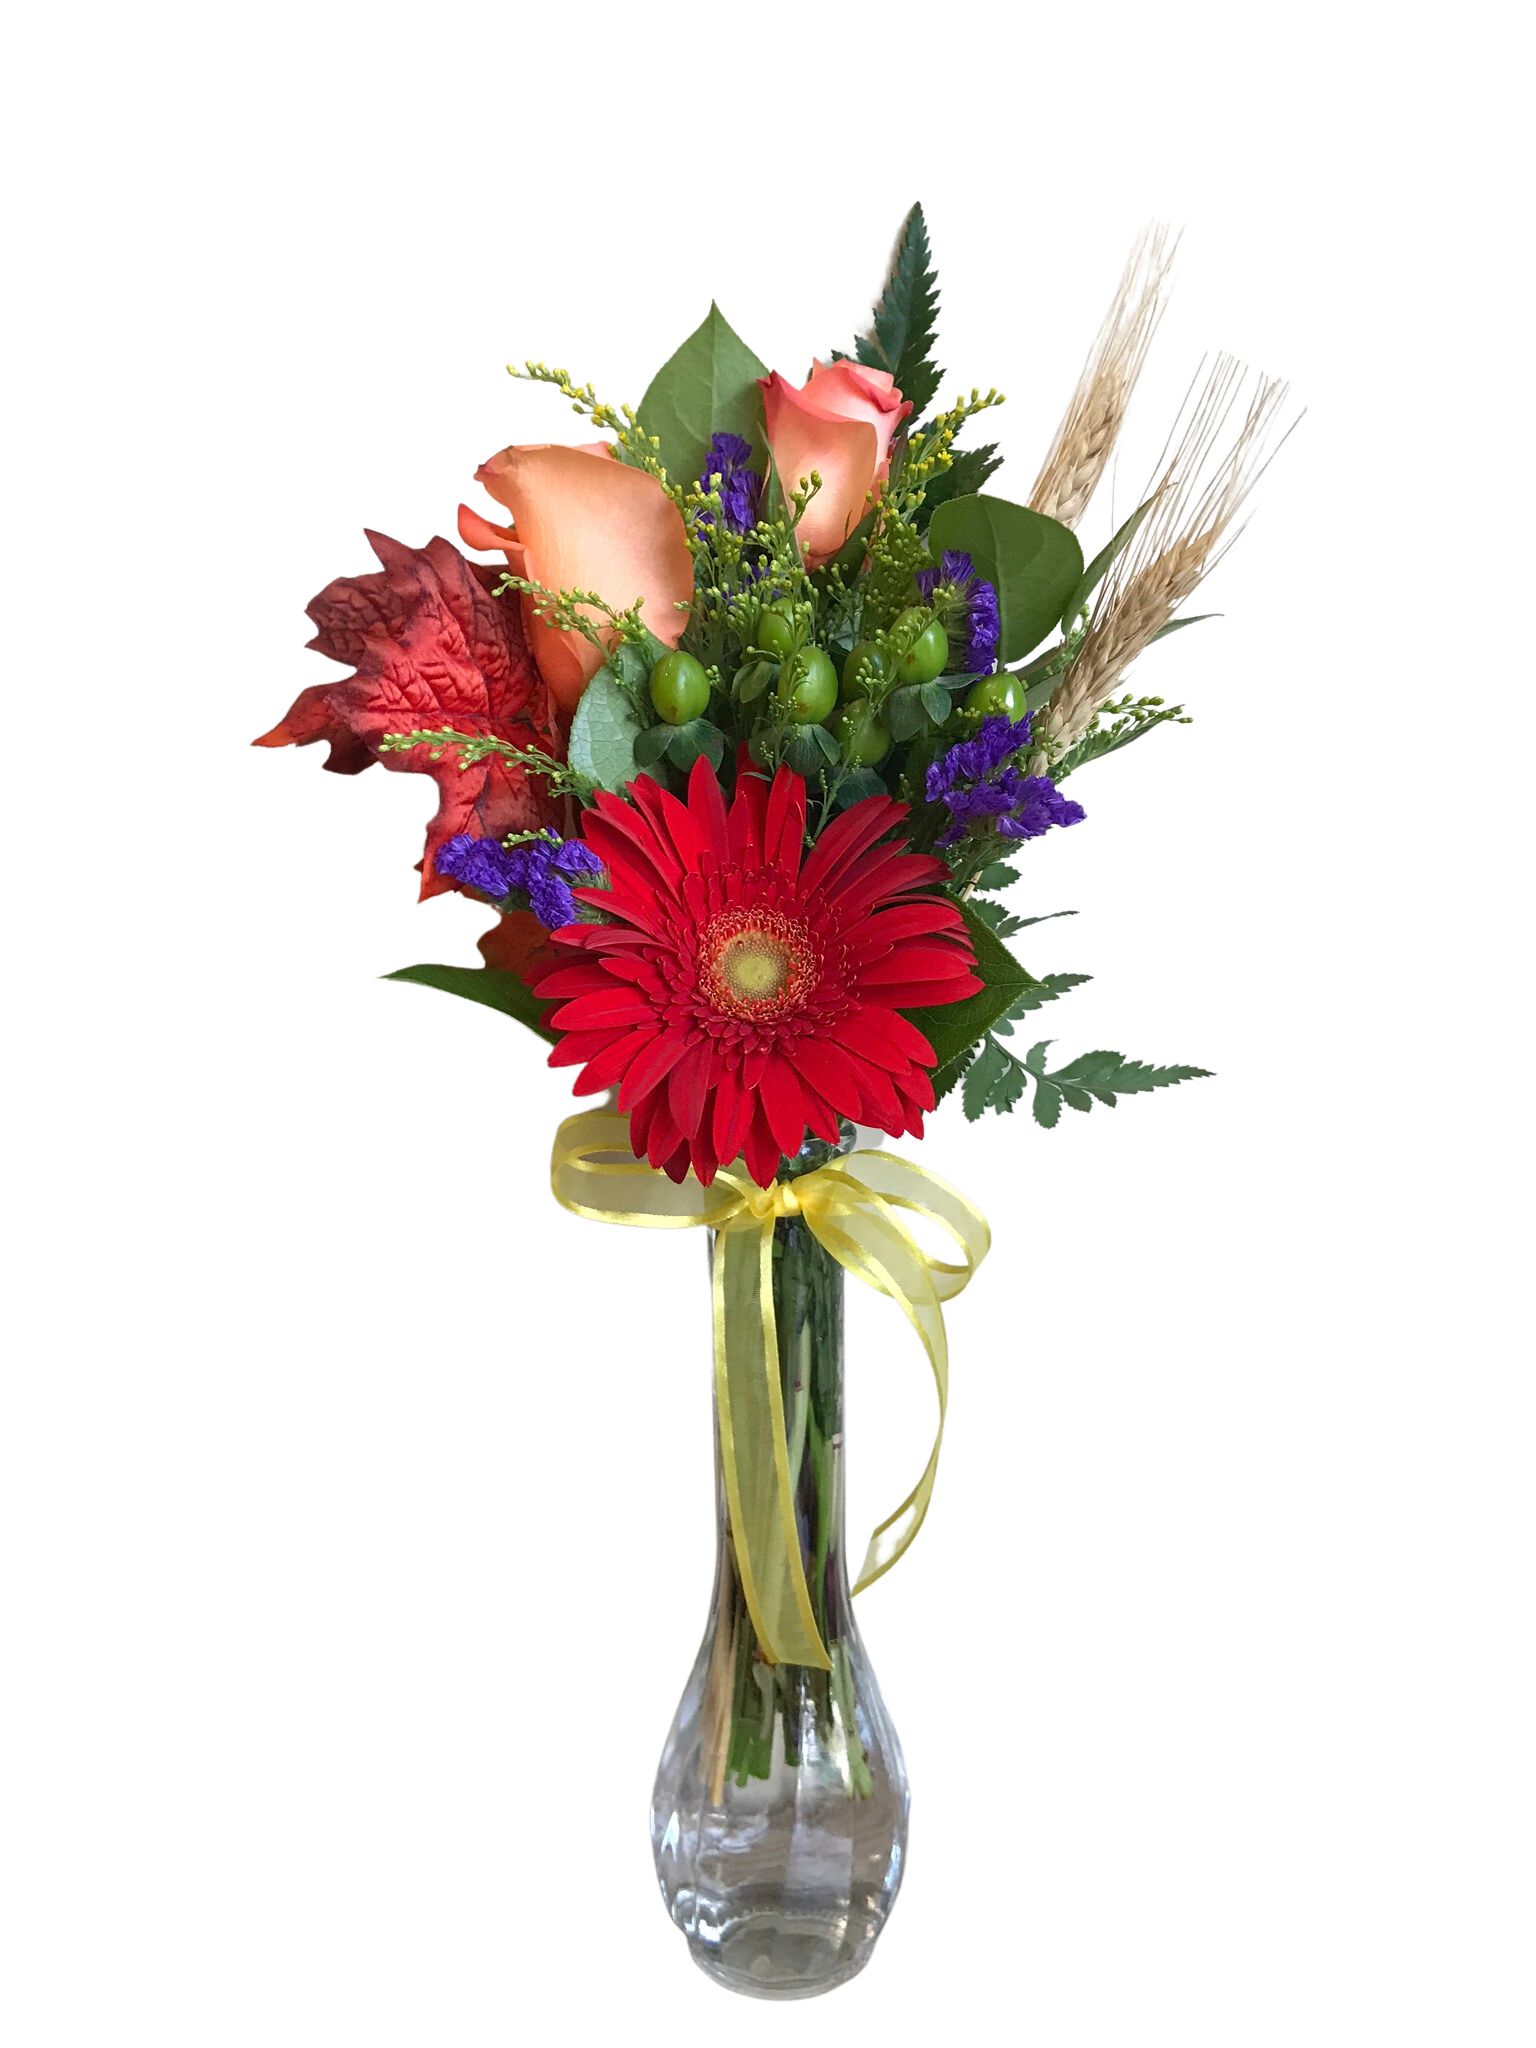 Autumn Greetings - Fall arrangement with orange roses, red gerbera daisy, statice, hypericum and wheat tufts.